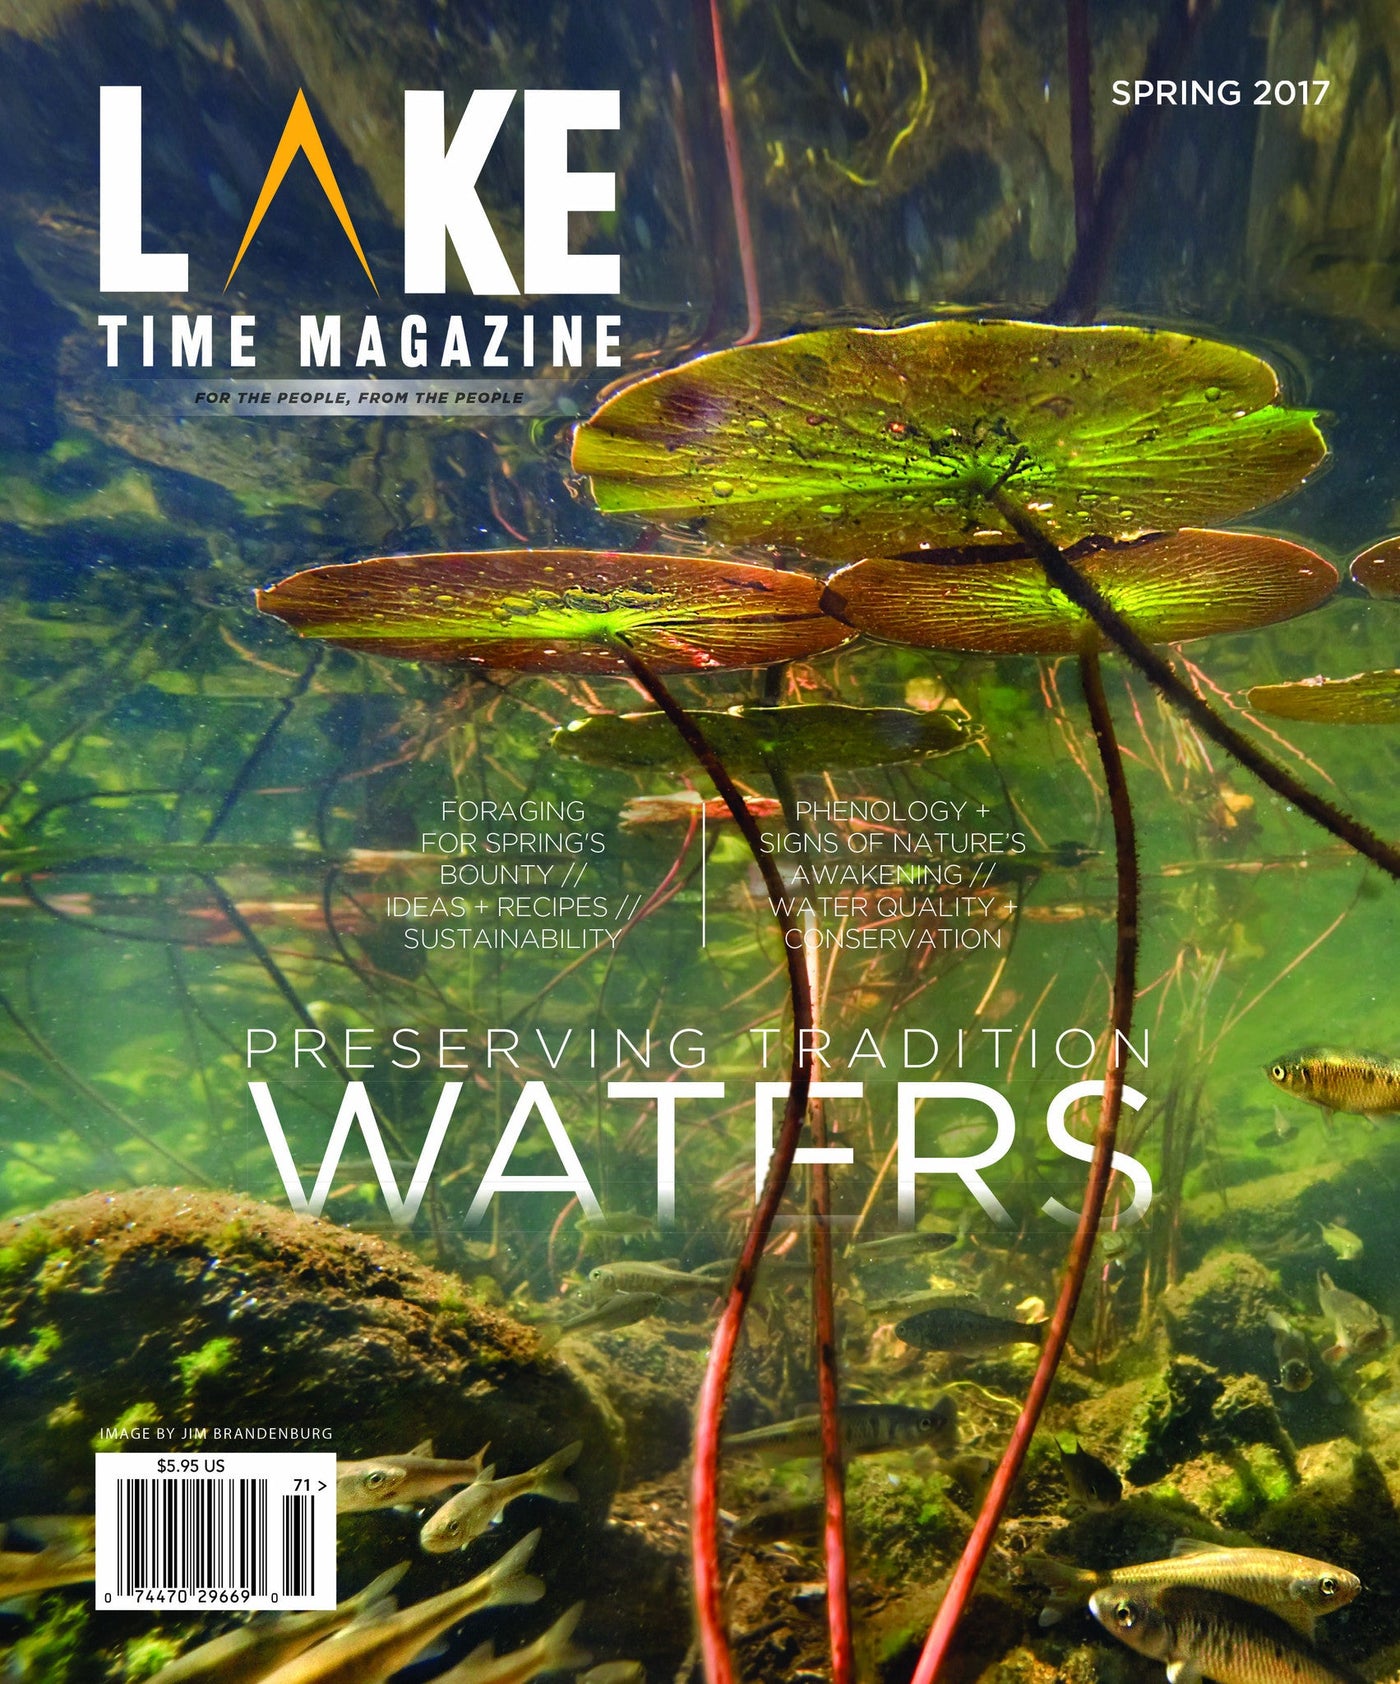 Lake Time Magazine: Issue 7 - The Lake and Company